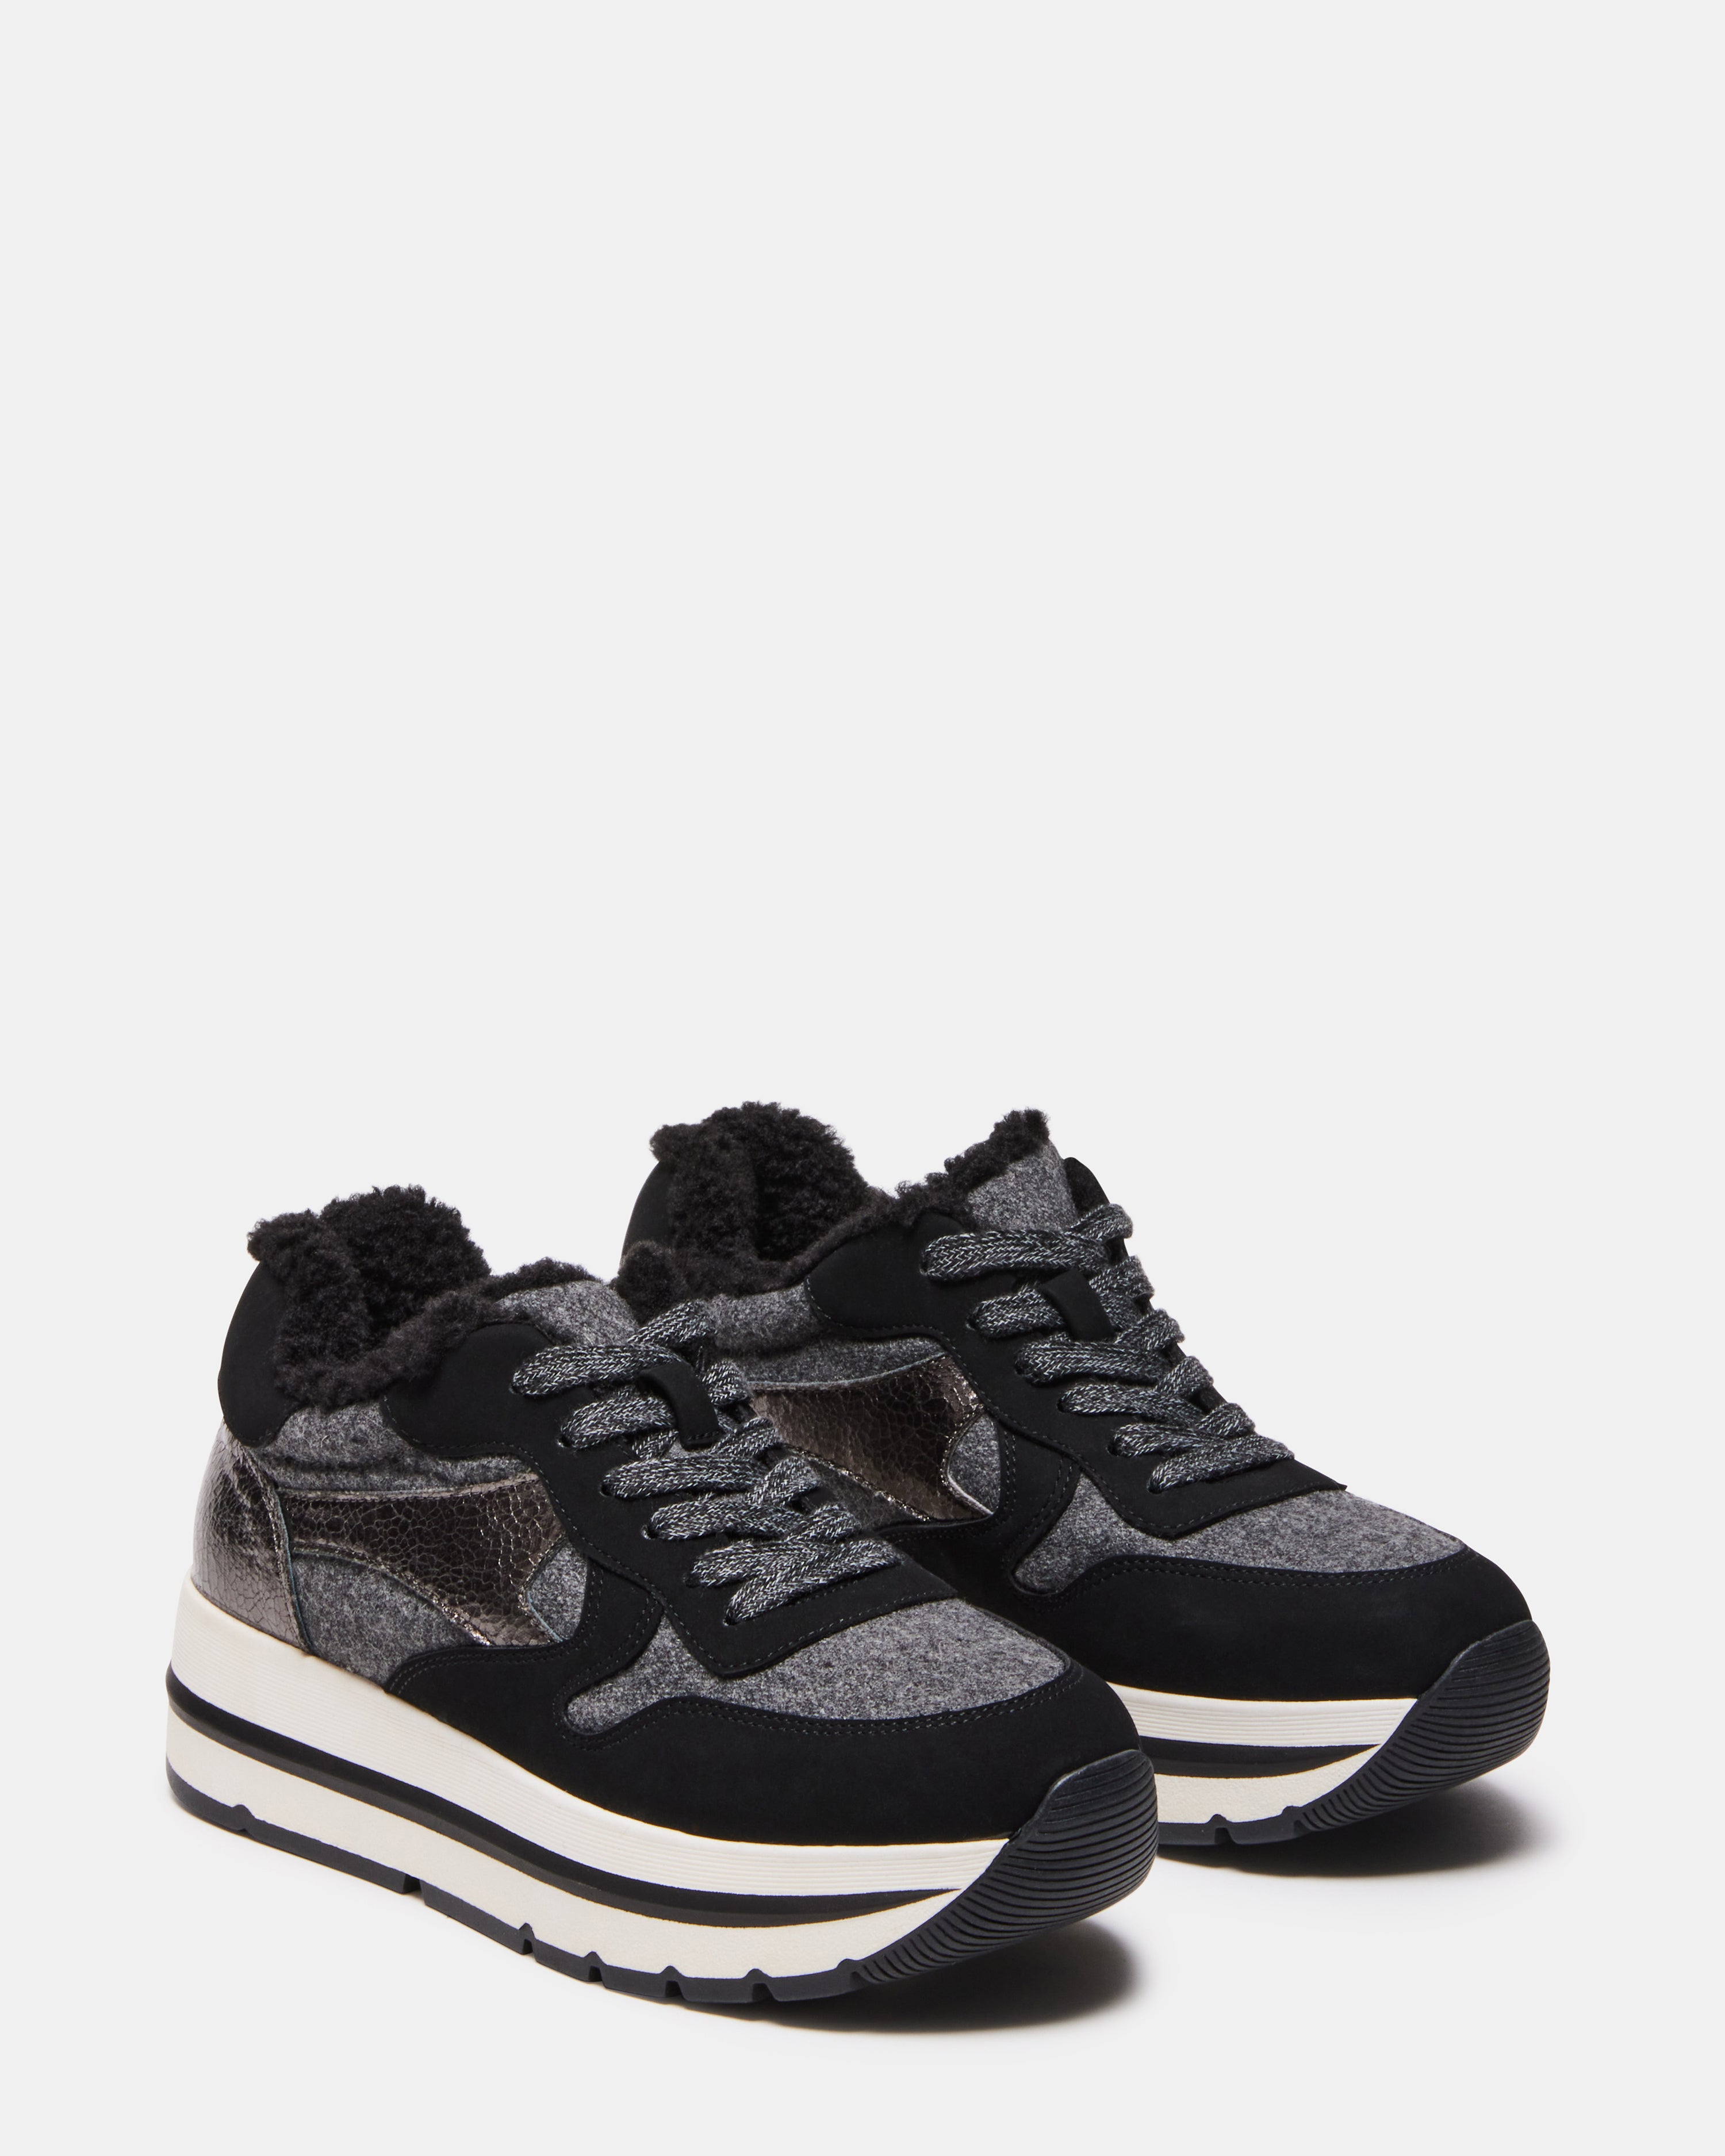 CLAY BLACK MULTI SNEAKERS- Hover Image